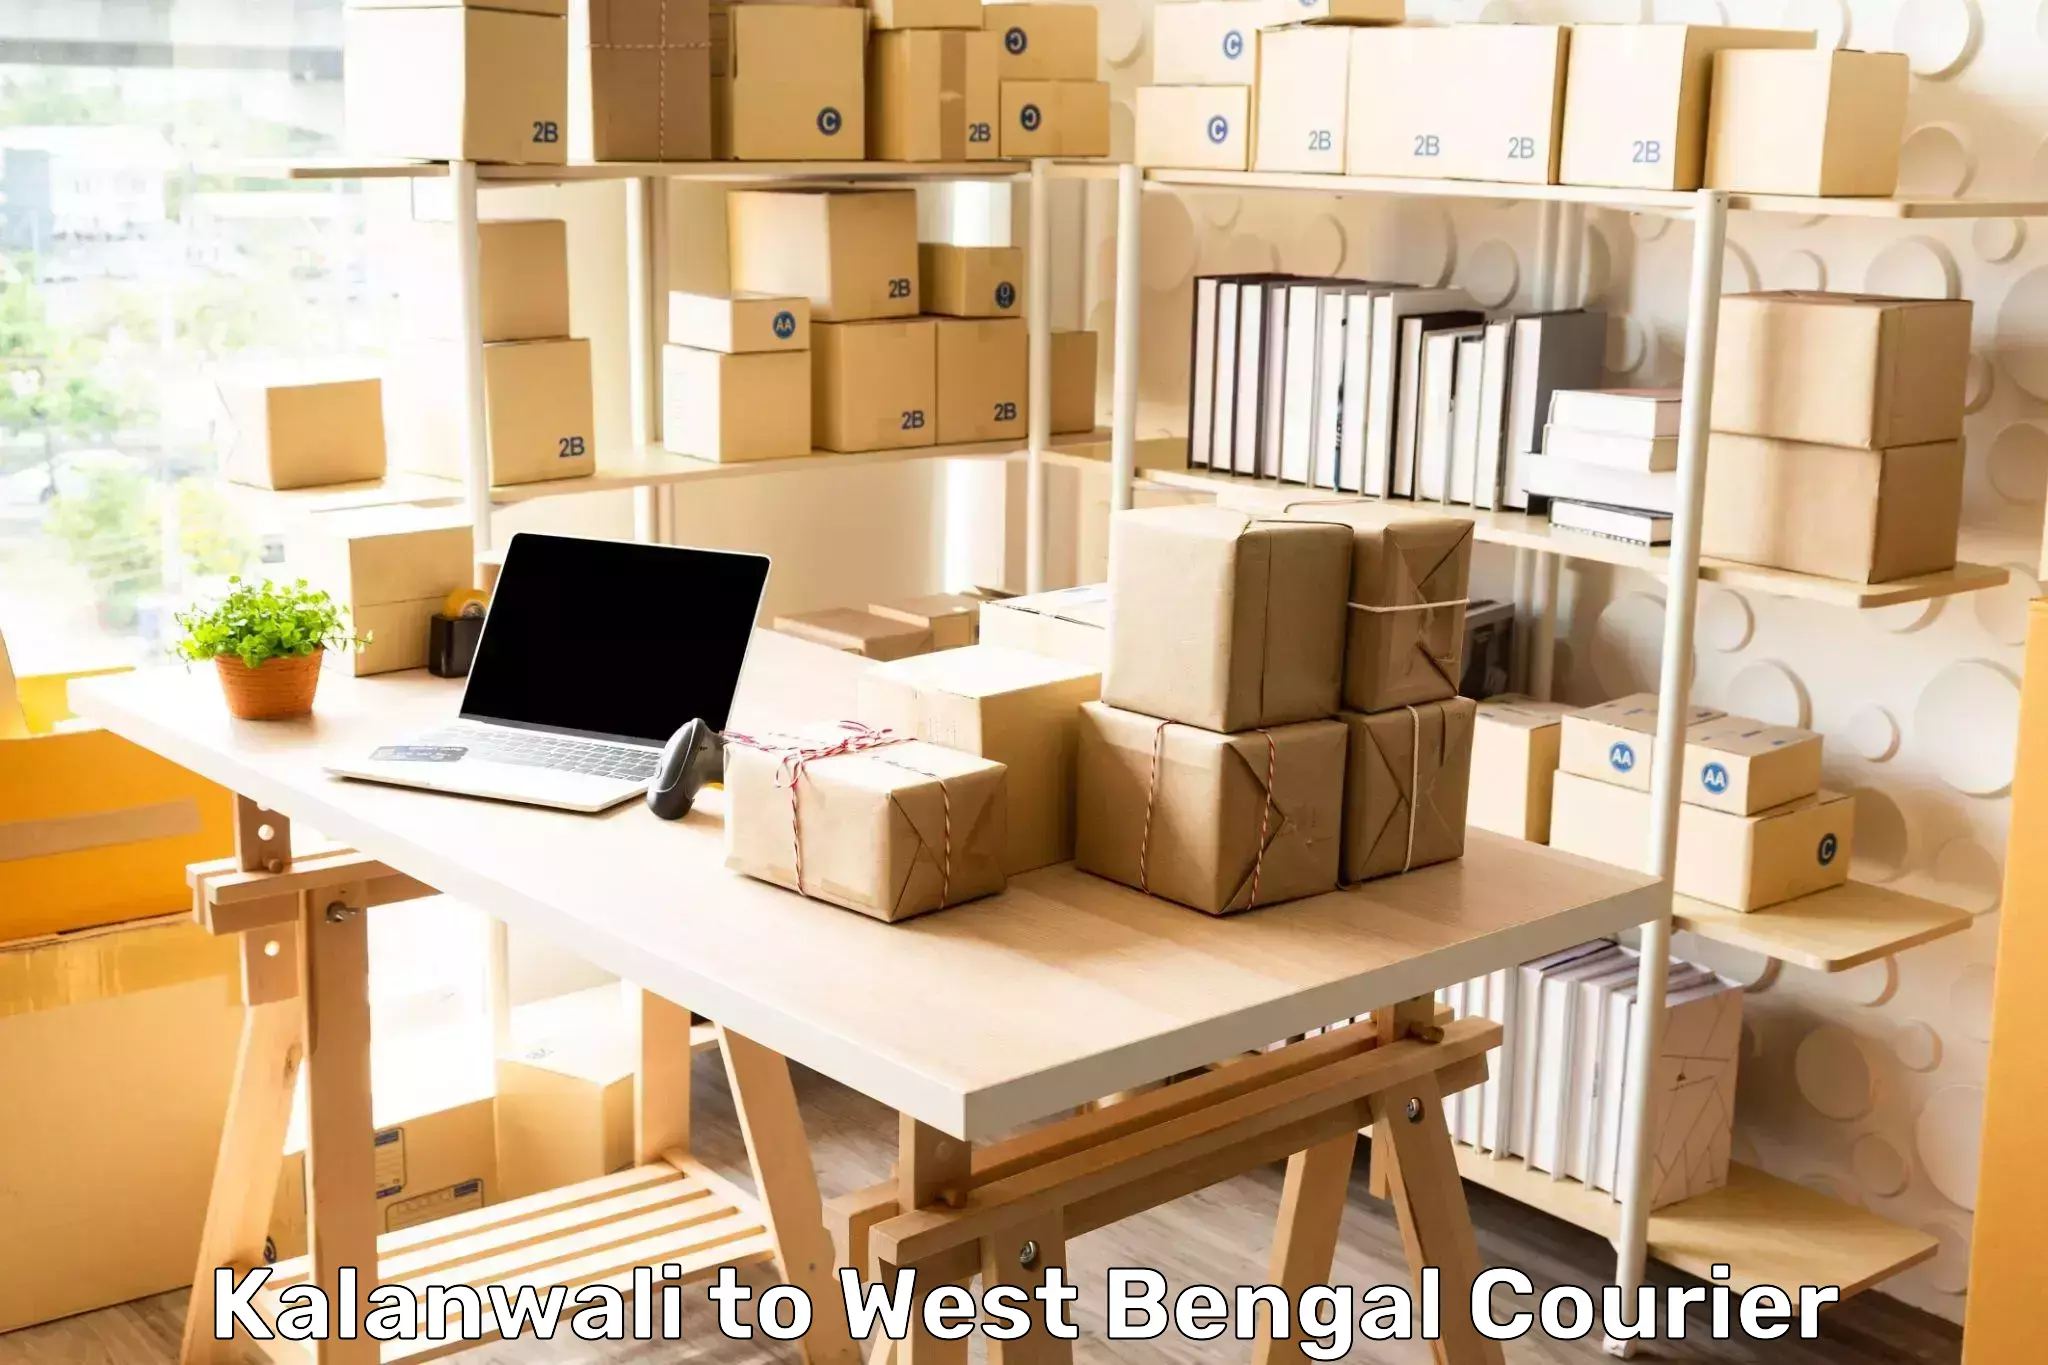 Secure package delivery in Kalanwali to West Bengal